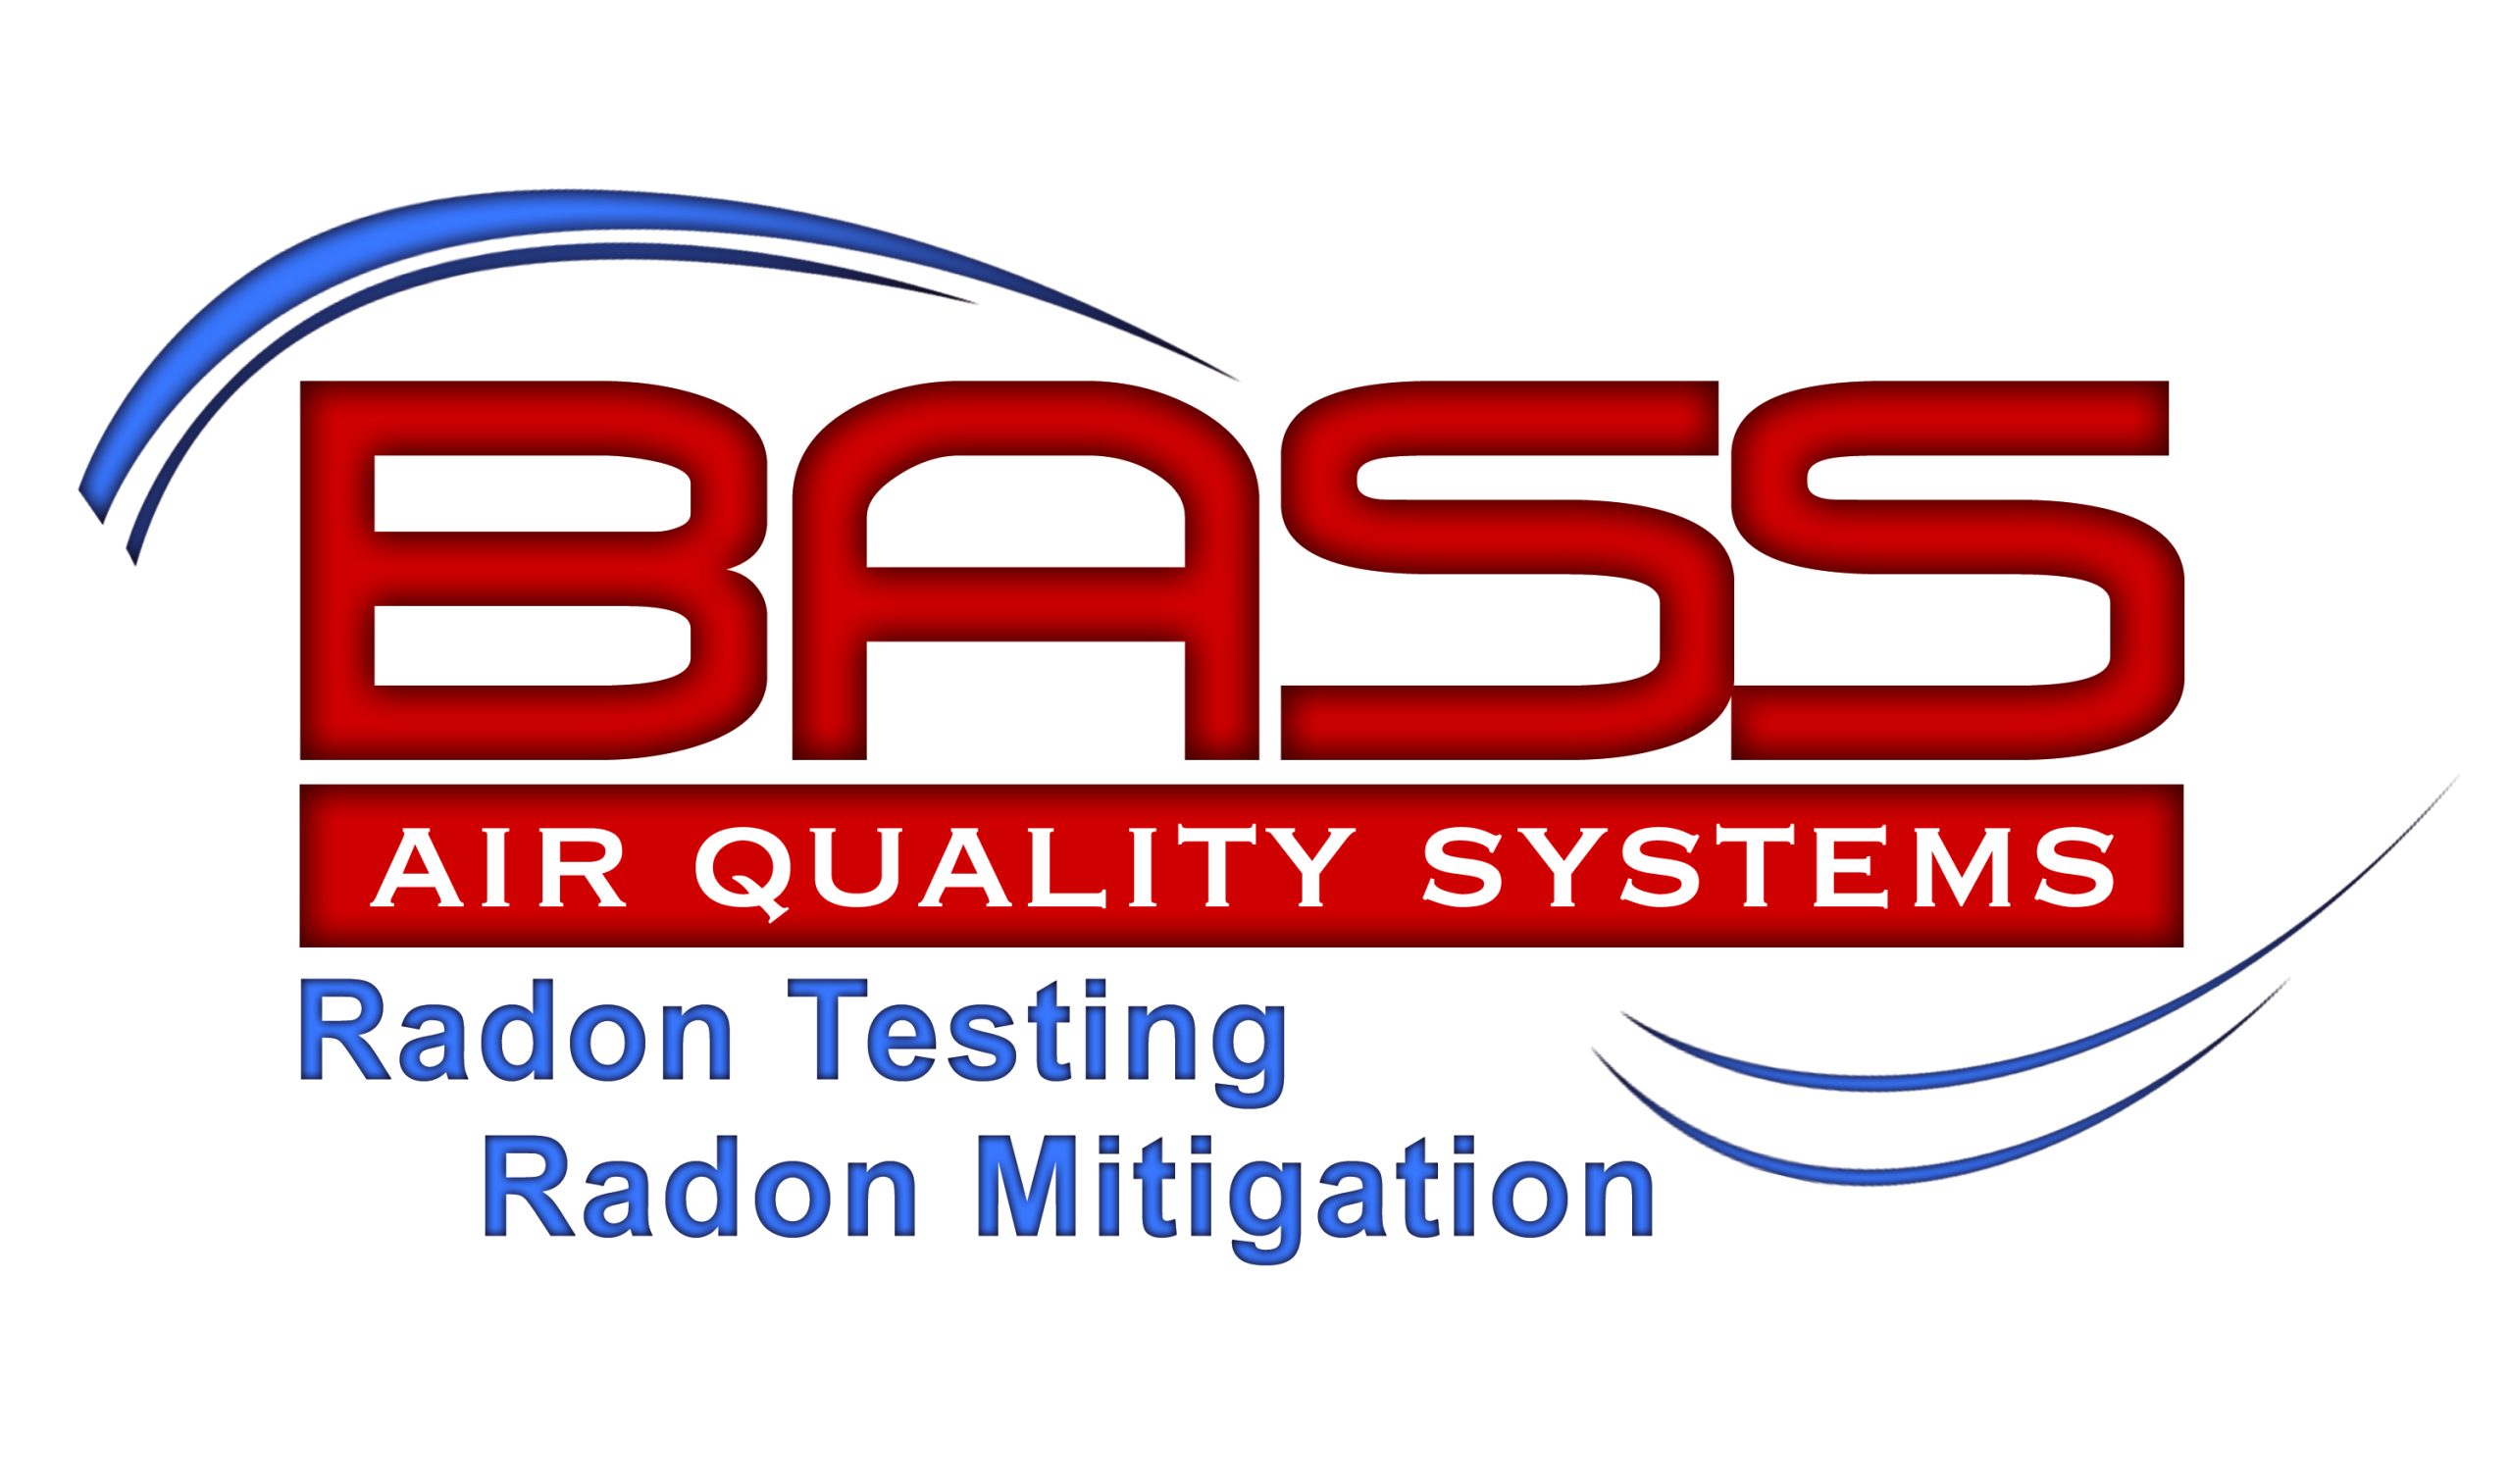 Bass Air Quality Systems